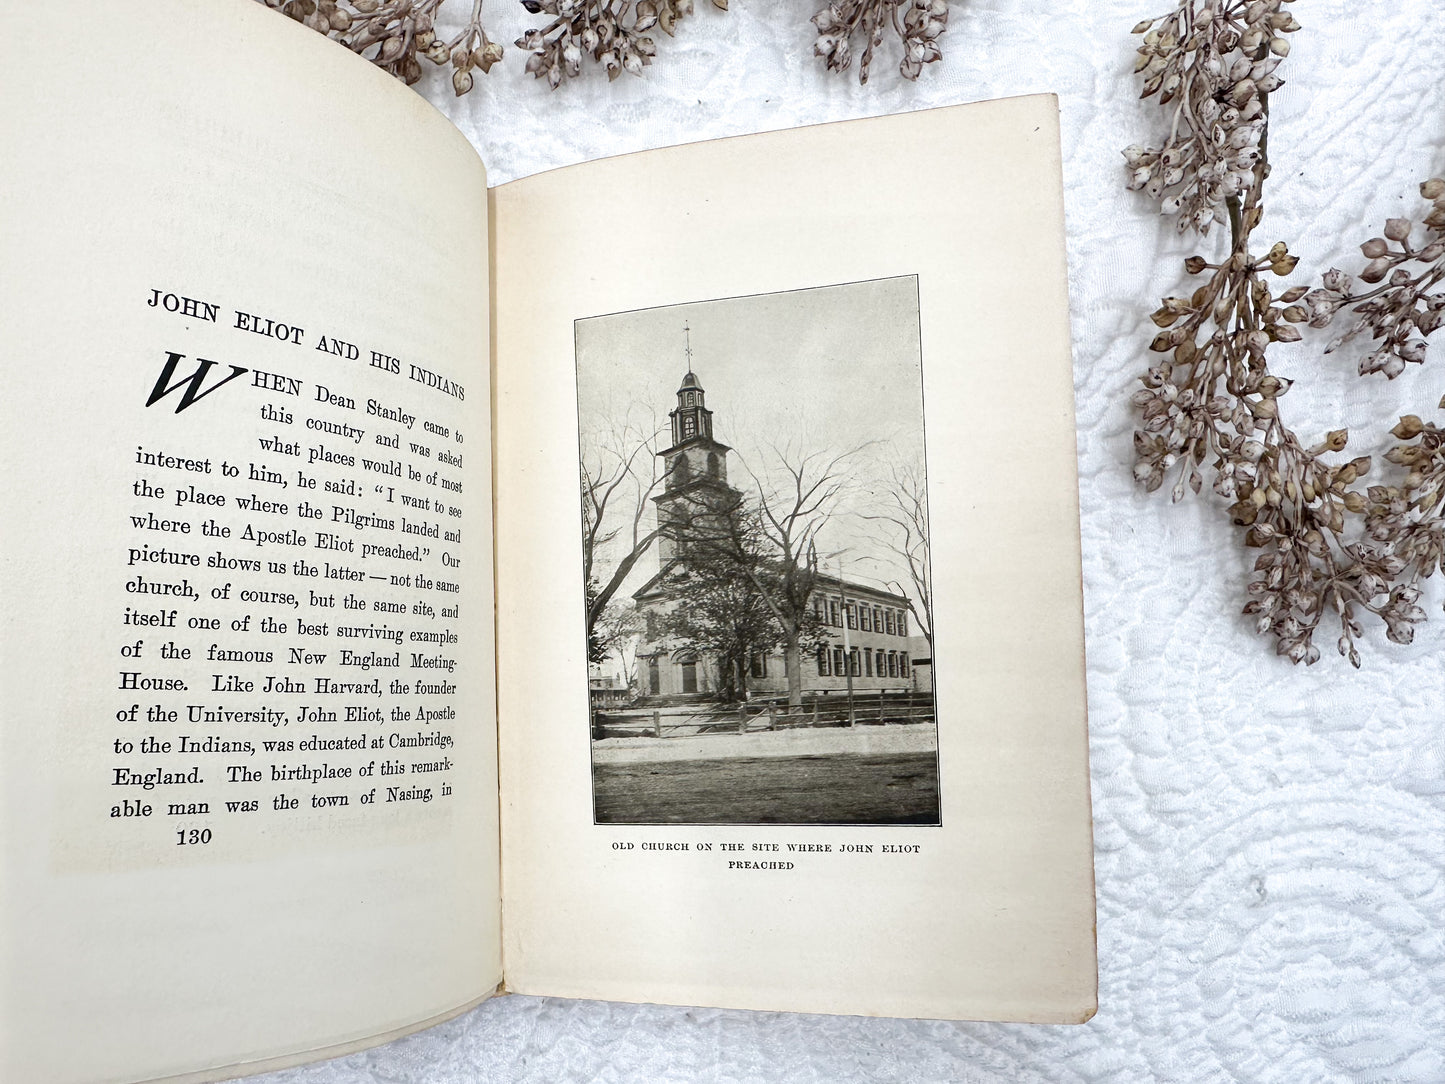 The Romance of Old New England Churches